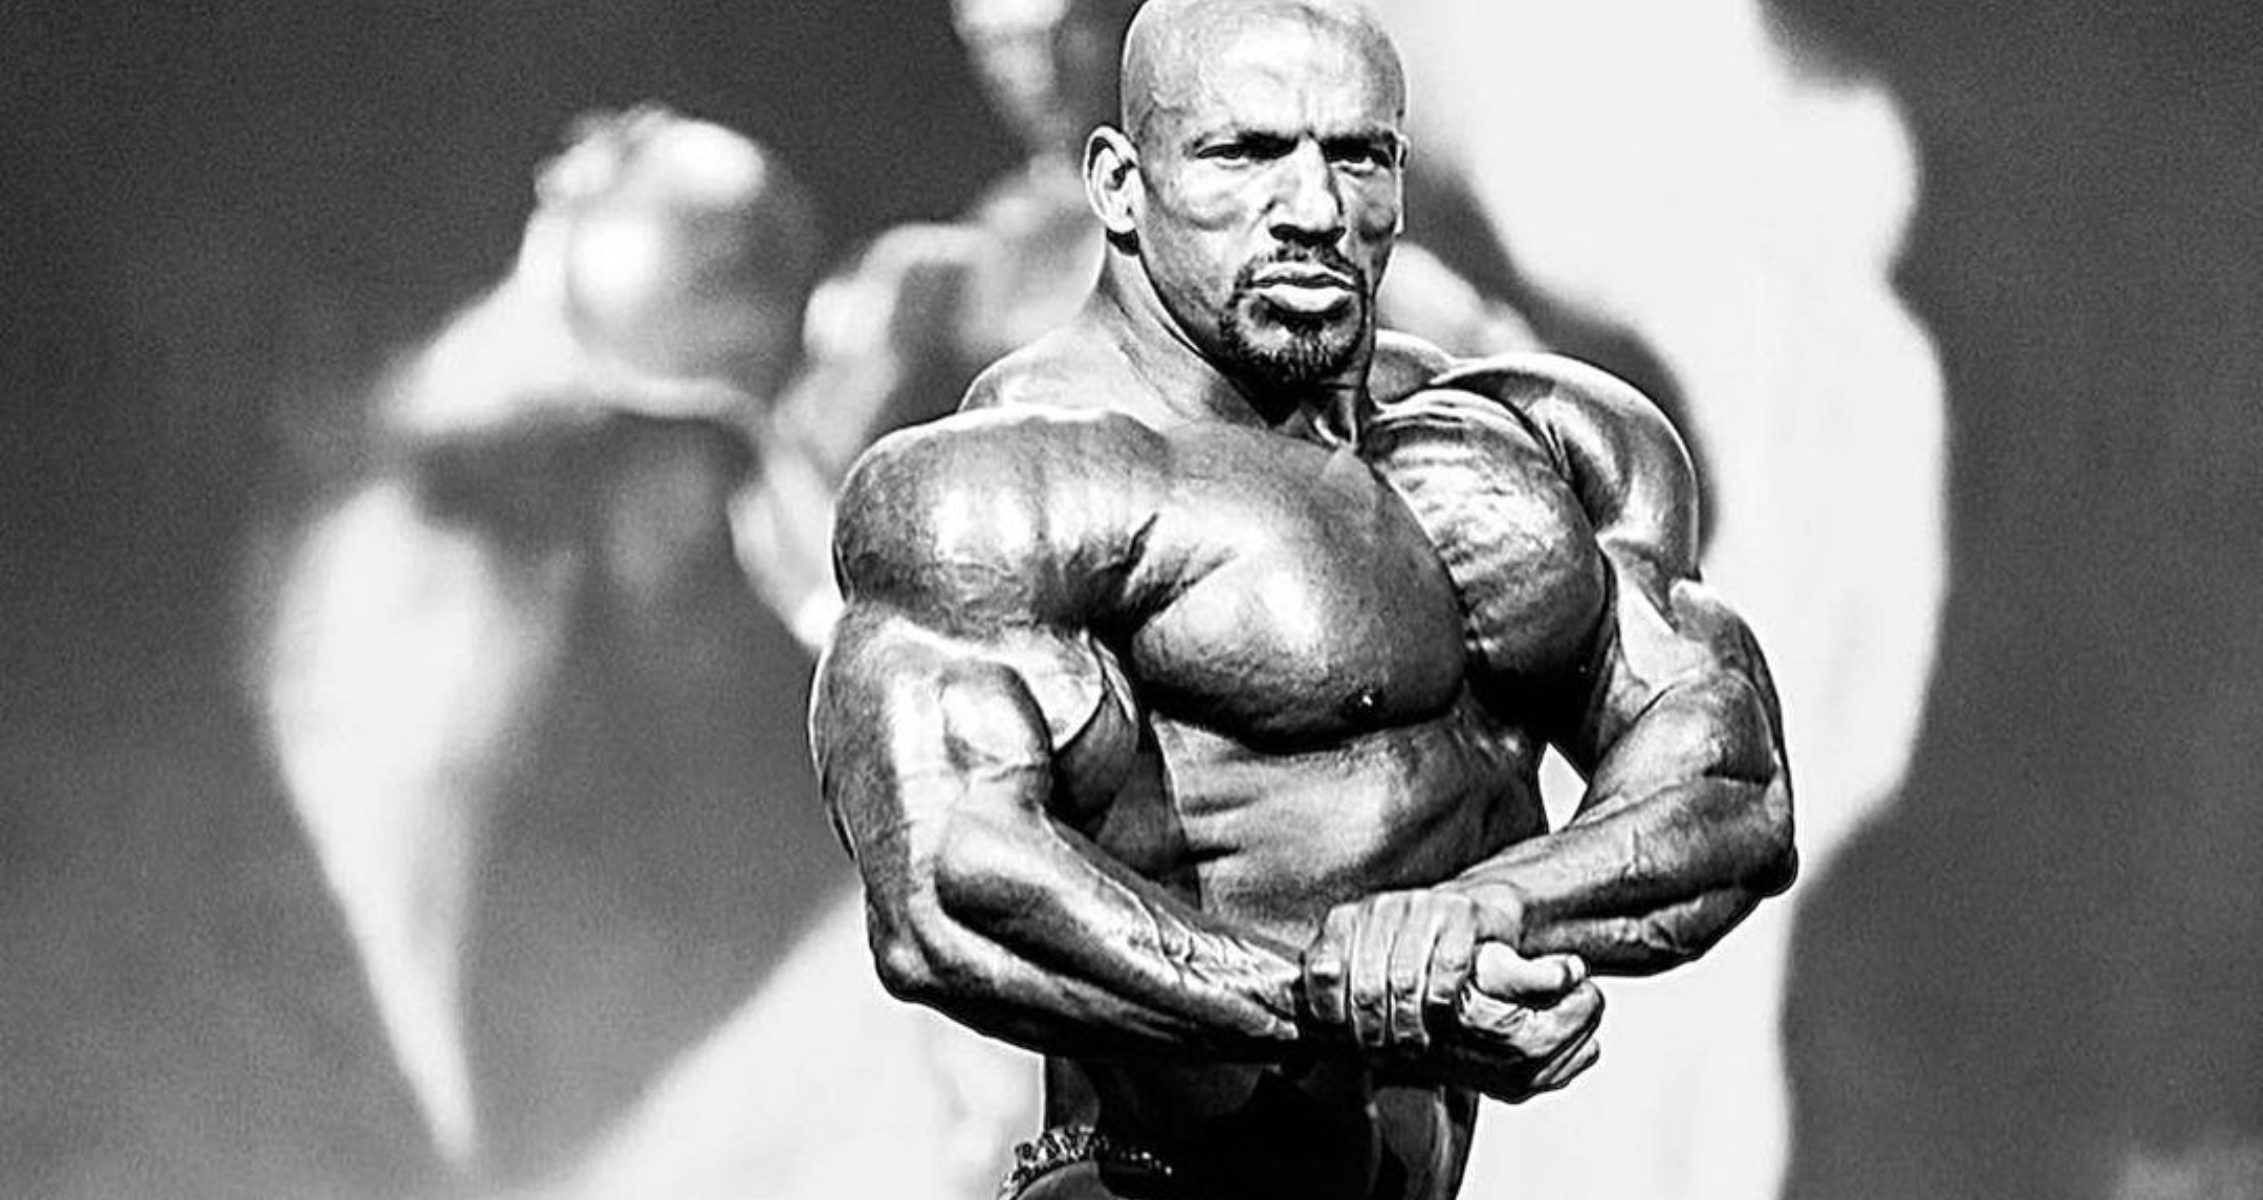 Nutrition Tips With Mr. Olympia Champ